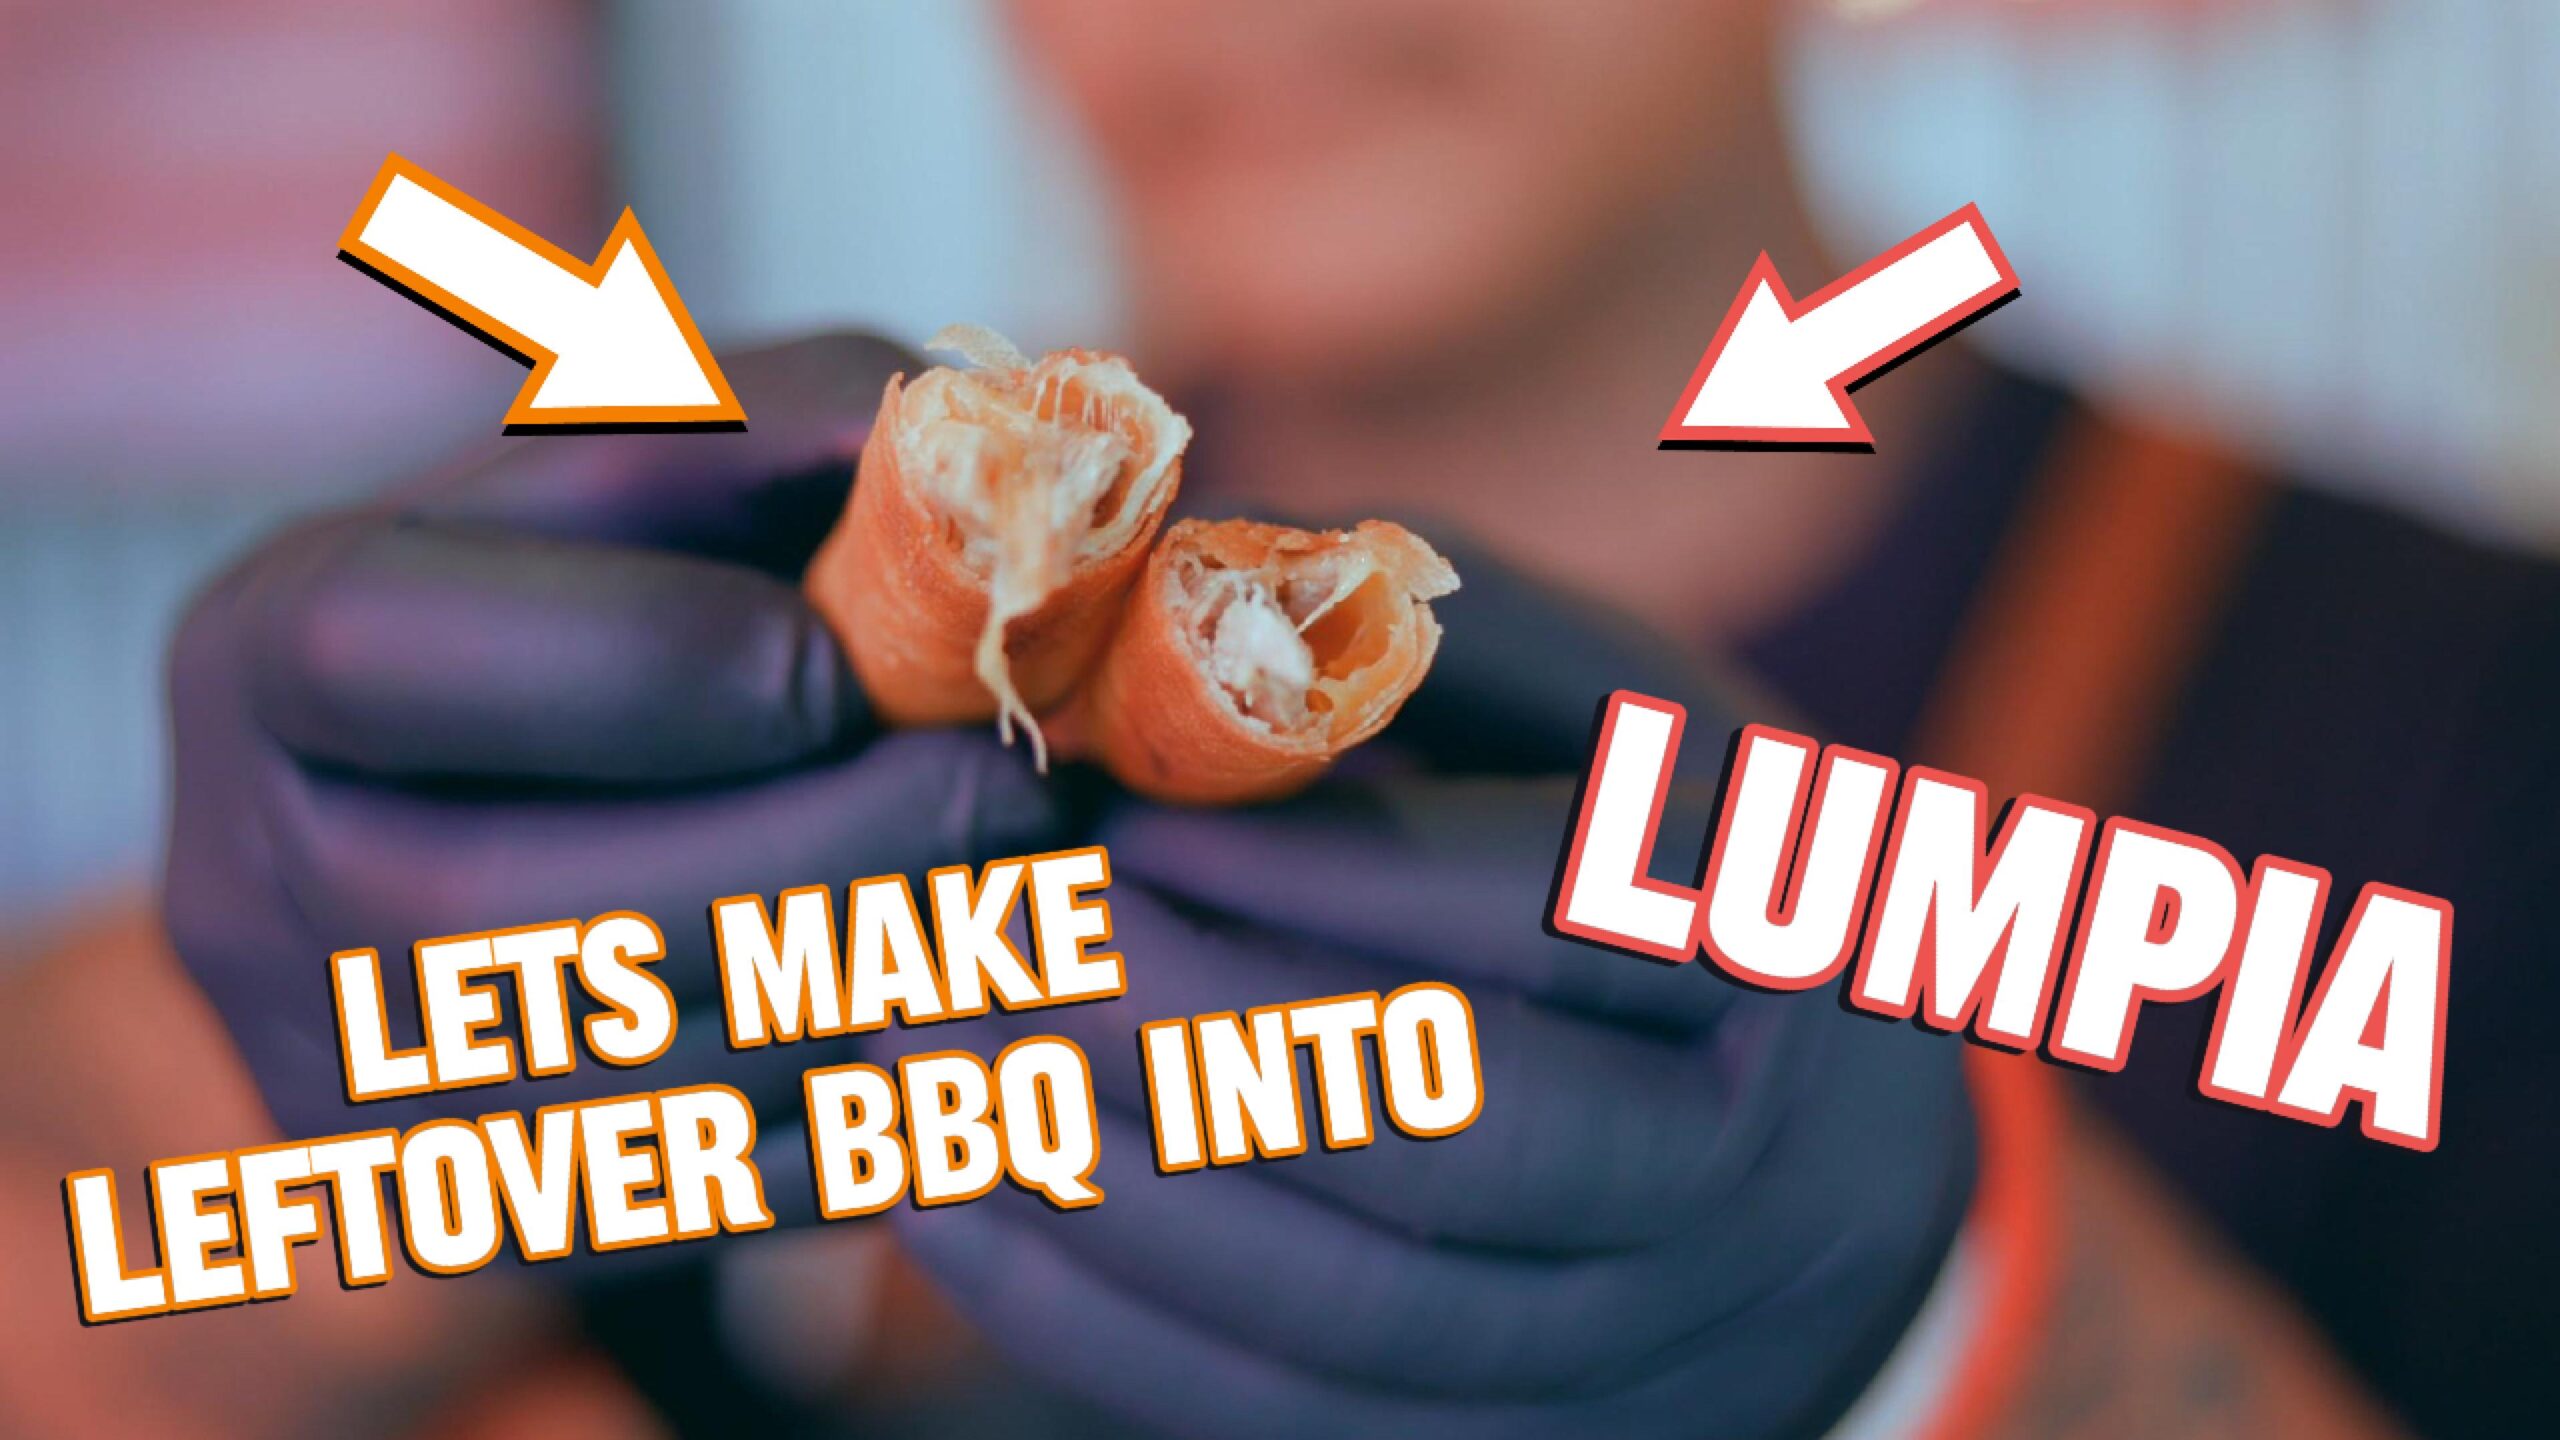 Let's Turn Leftover BBQ into Lumpia's